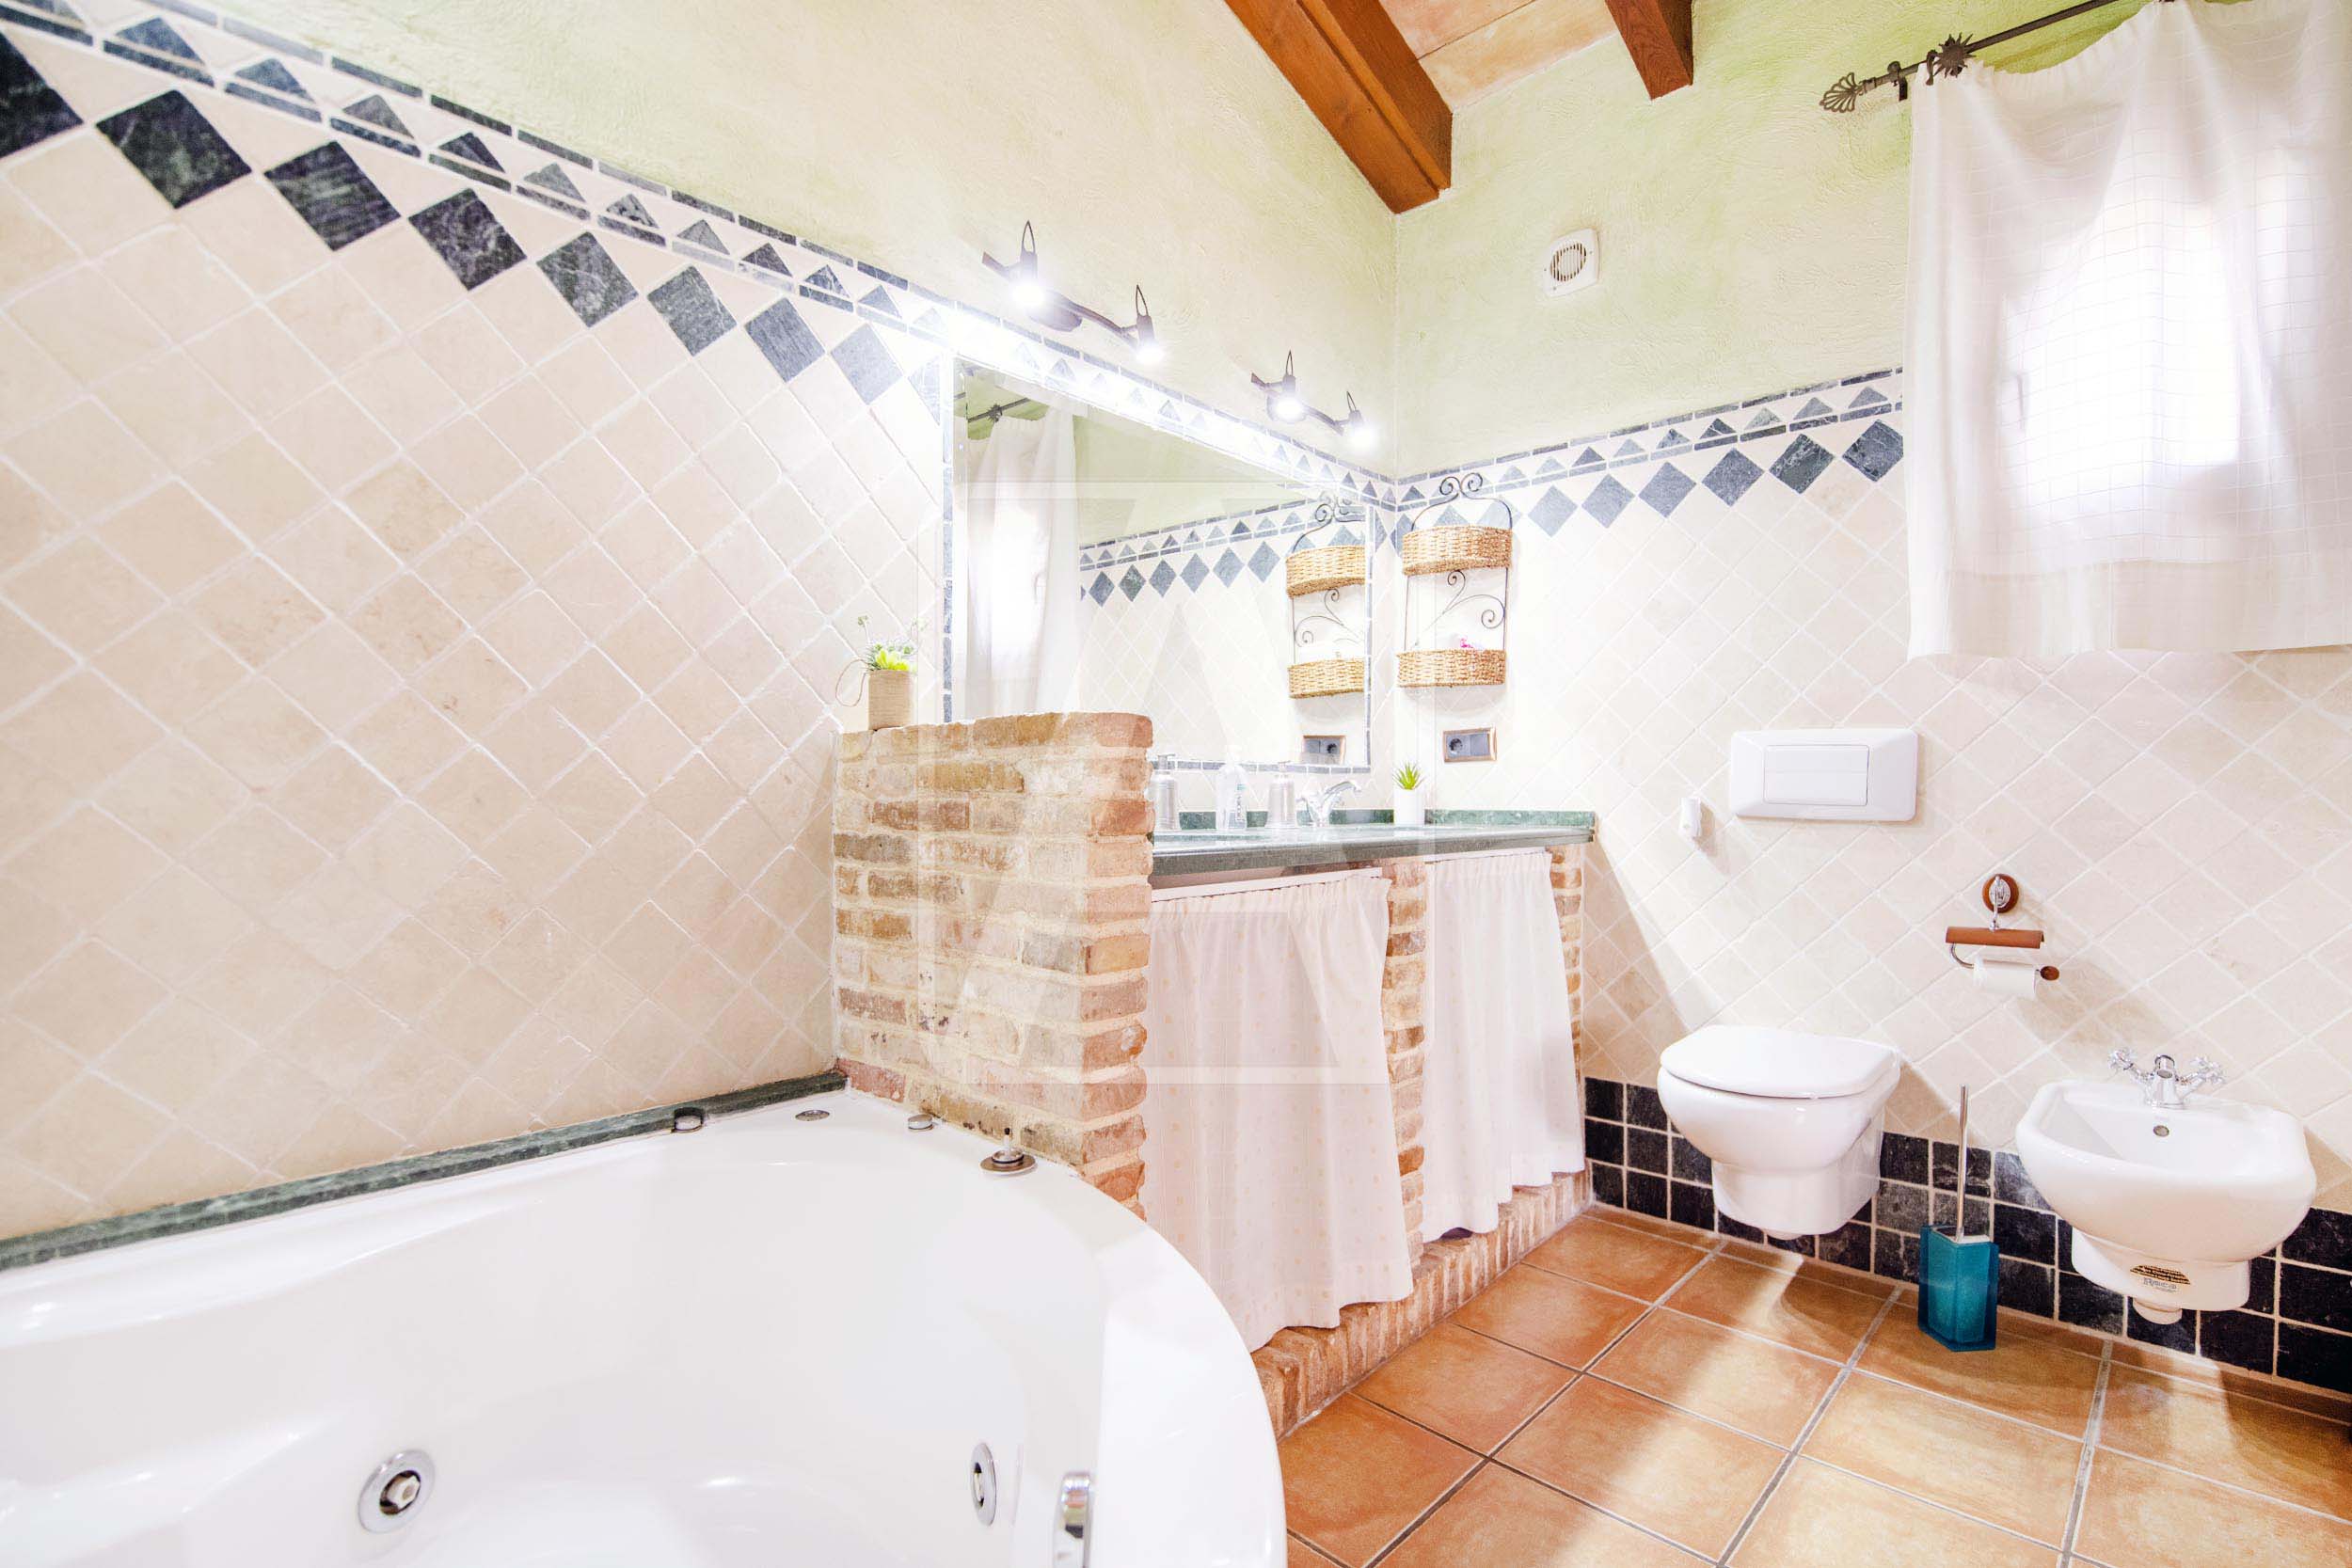 Countryhome for sale in Alicante 10